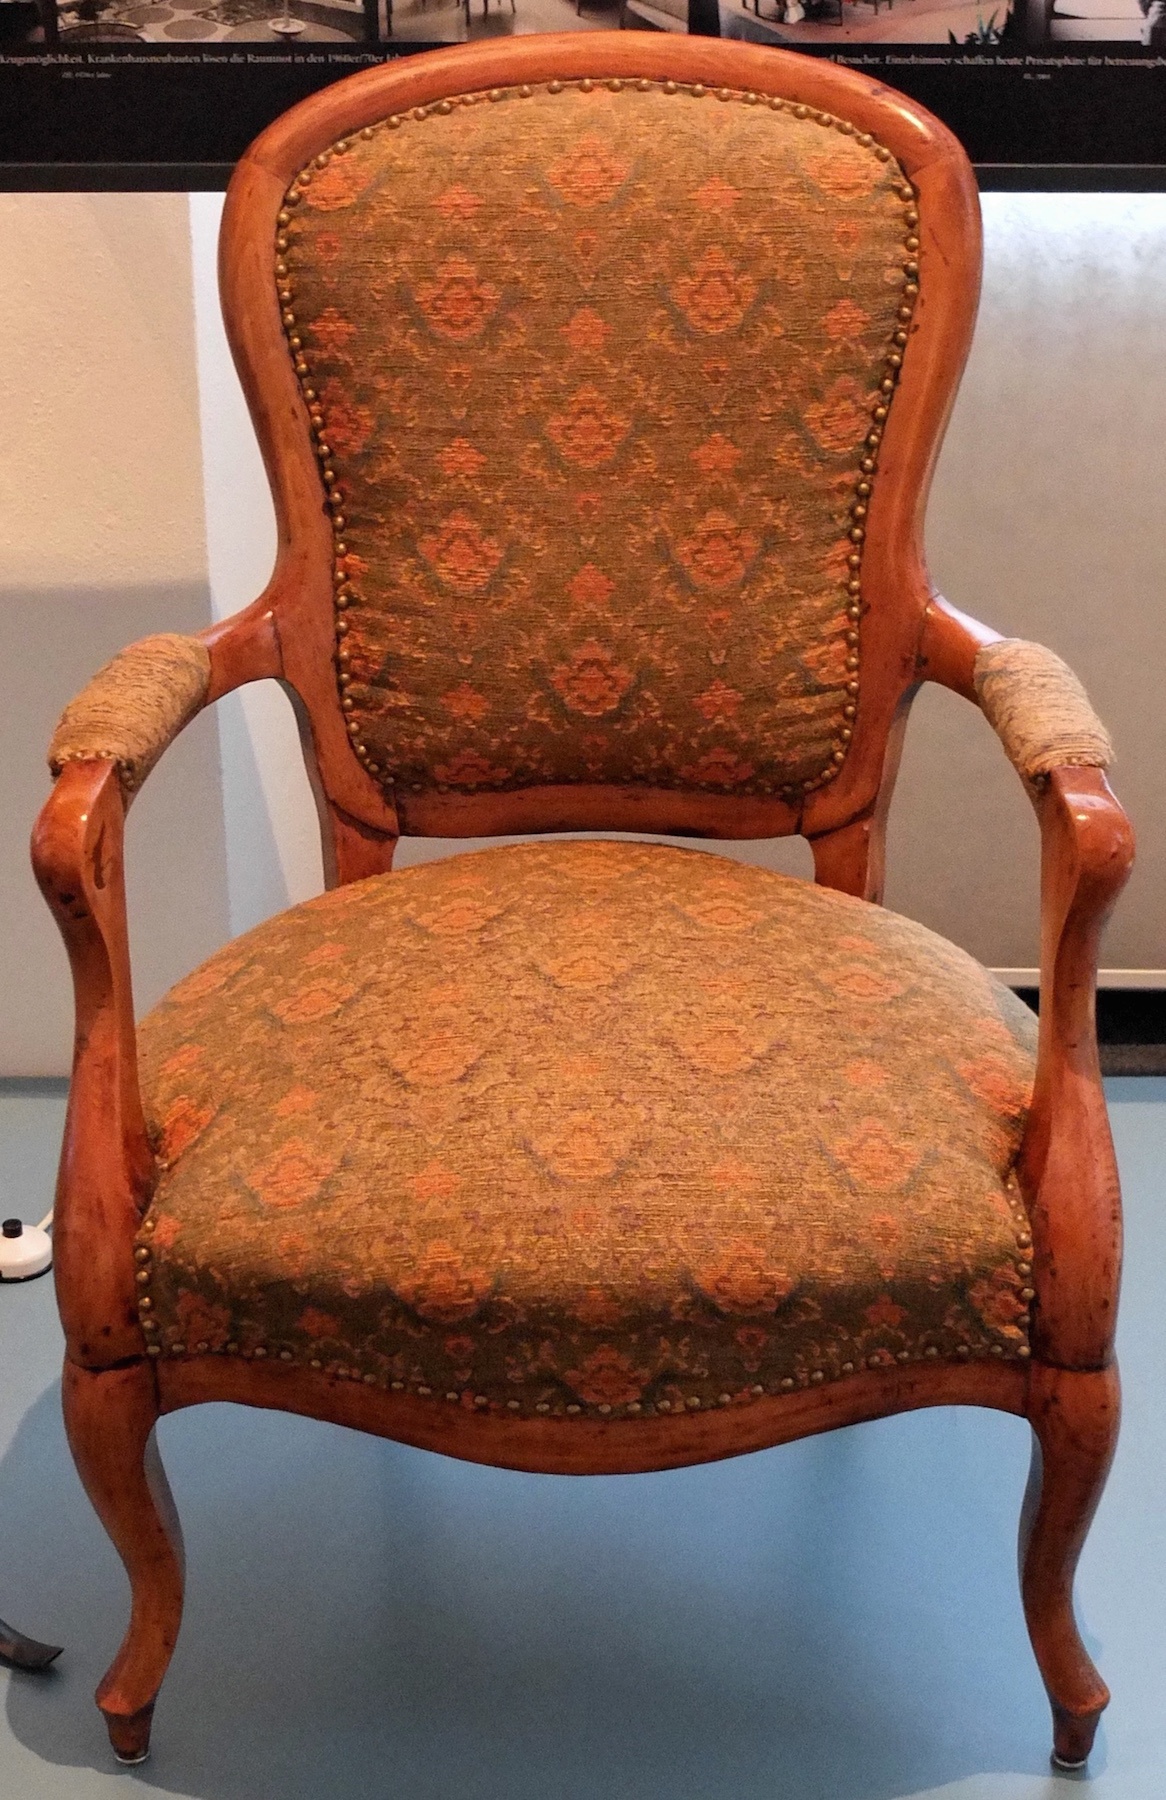 Fauteuil (Württembergisches Psychiatriemuseum CC BY)